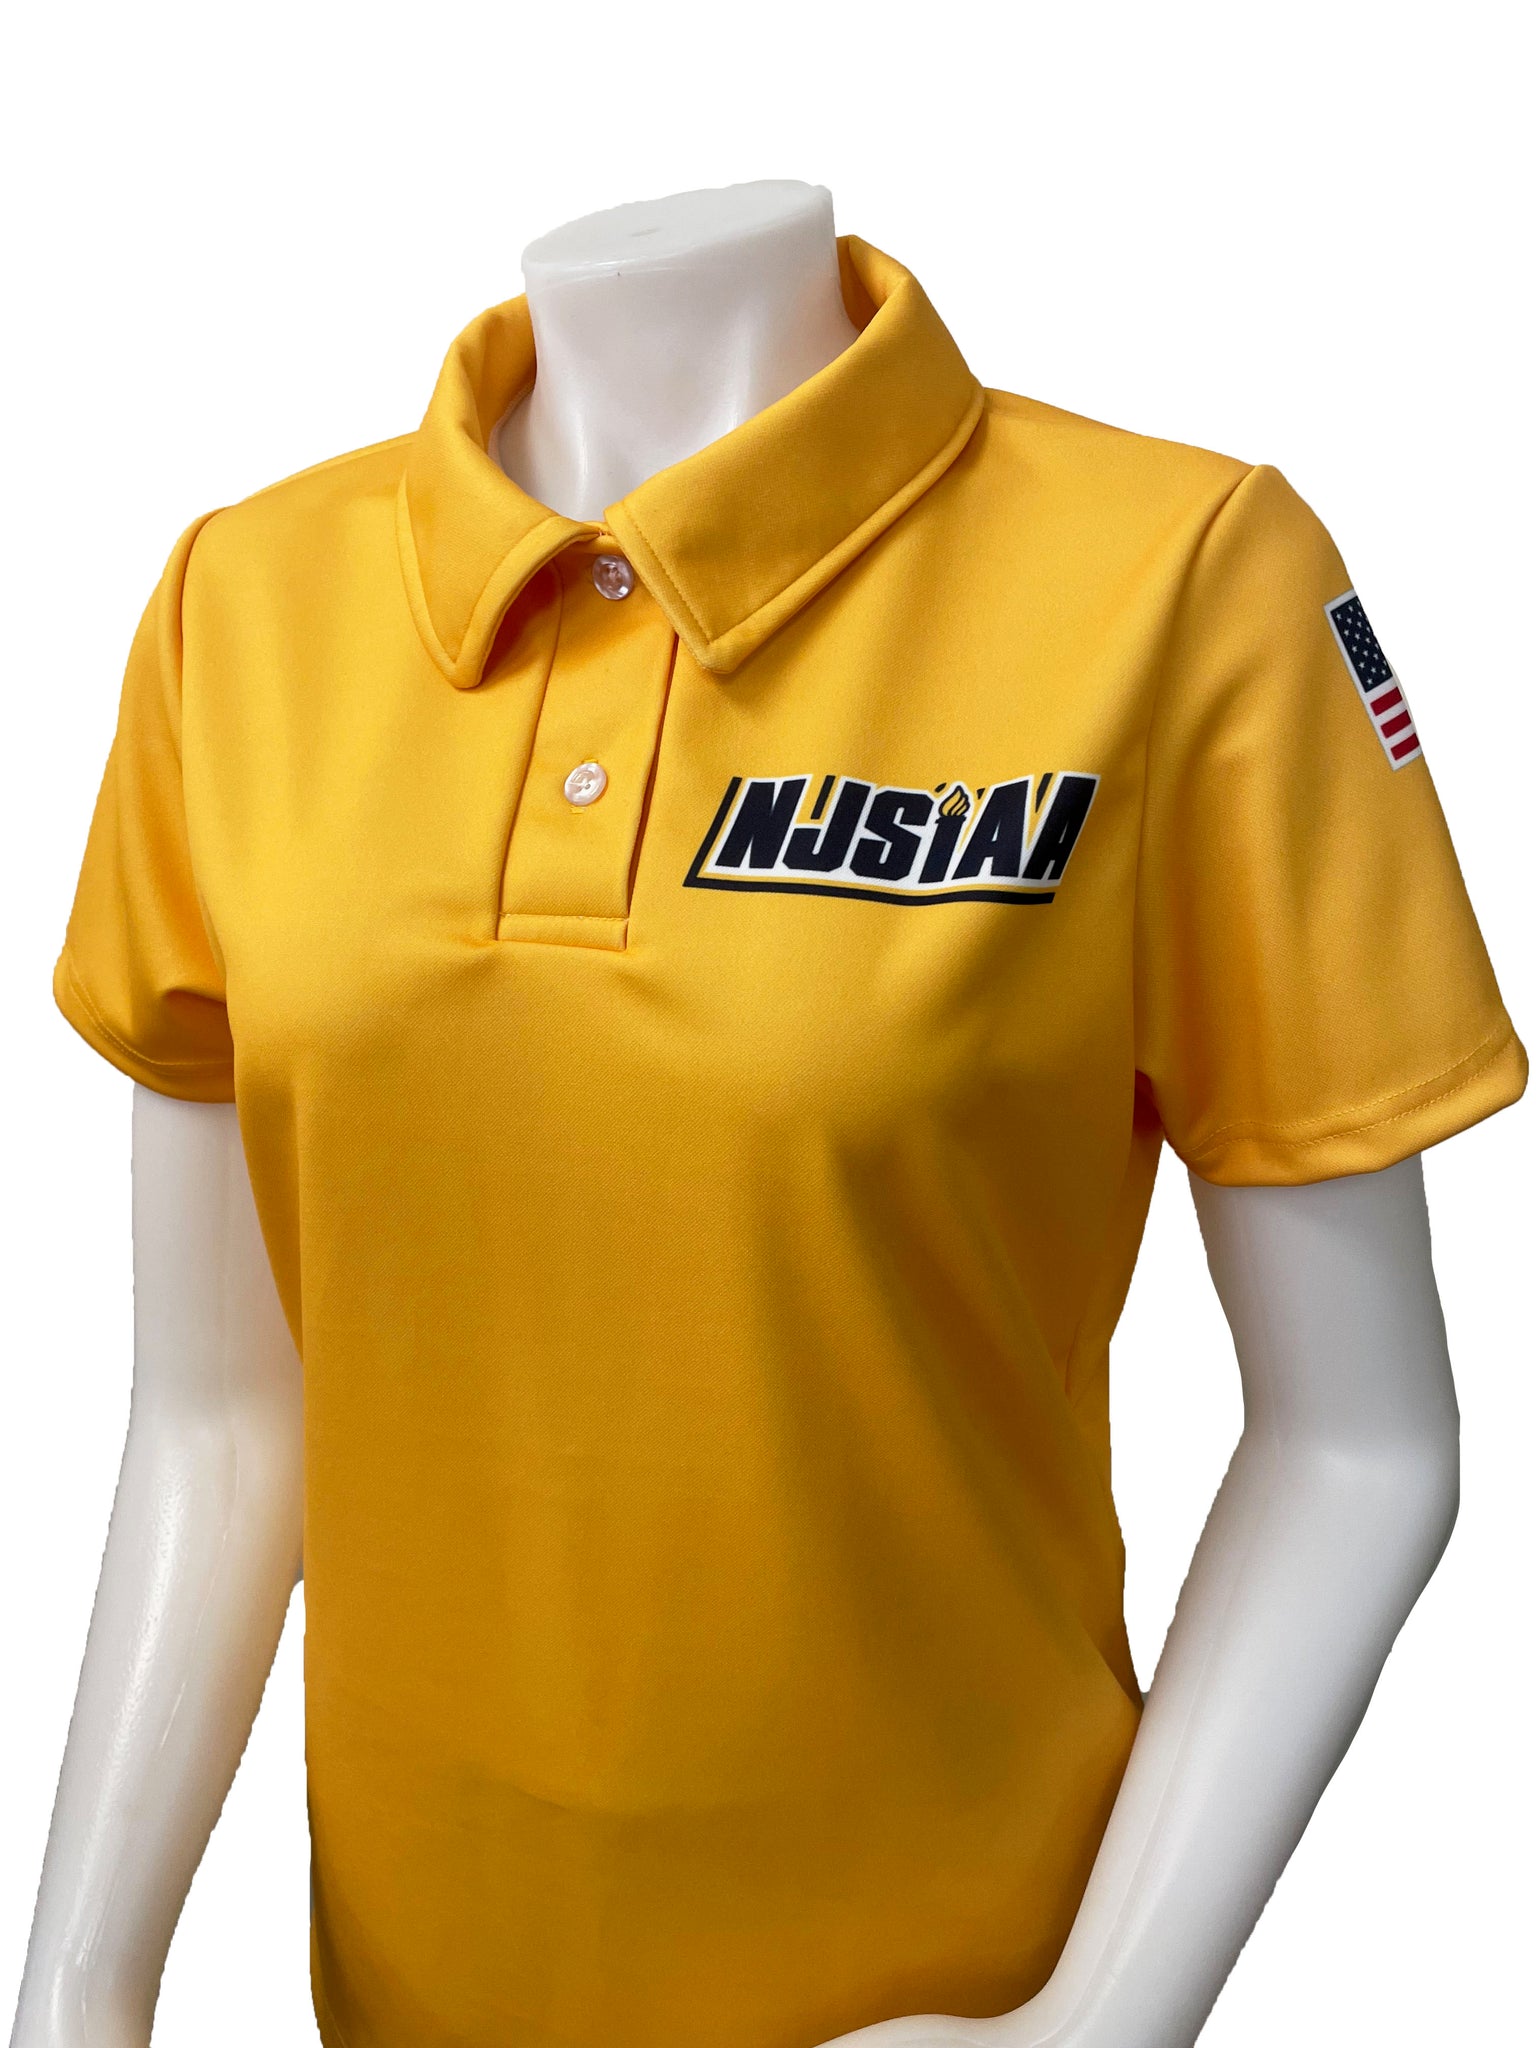 USA402NJ-GLD - Smitty "Made in USA" - NJSIAA Women's Cross Country and Track Short Sleeve Shirt